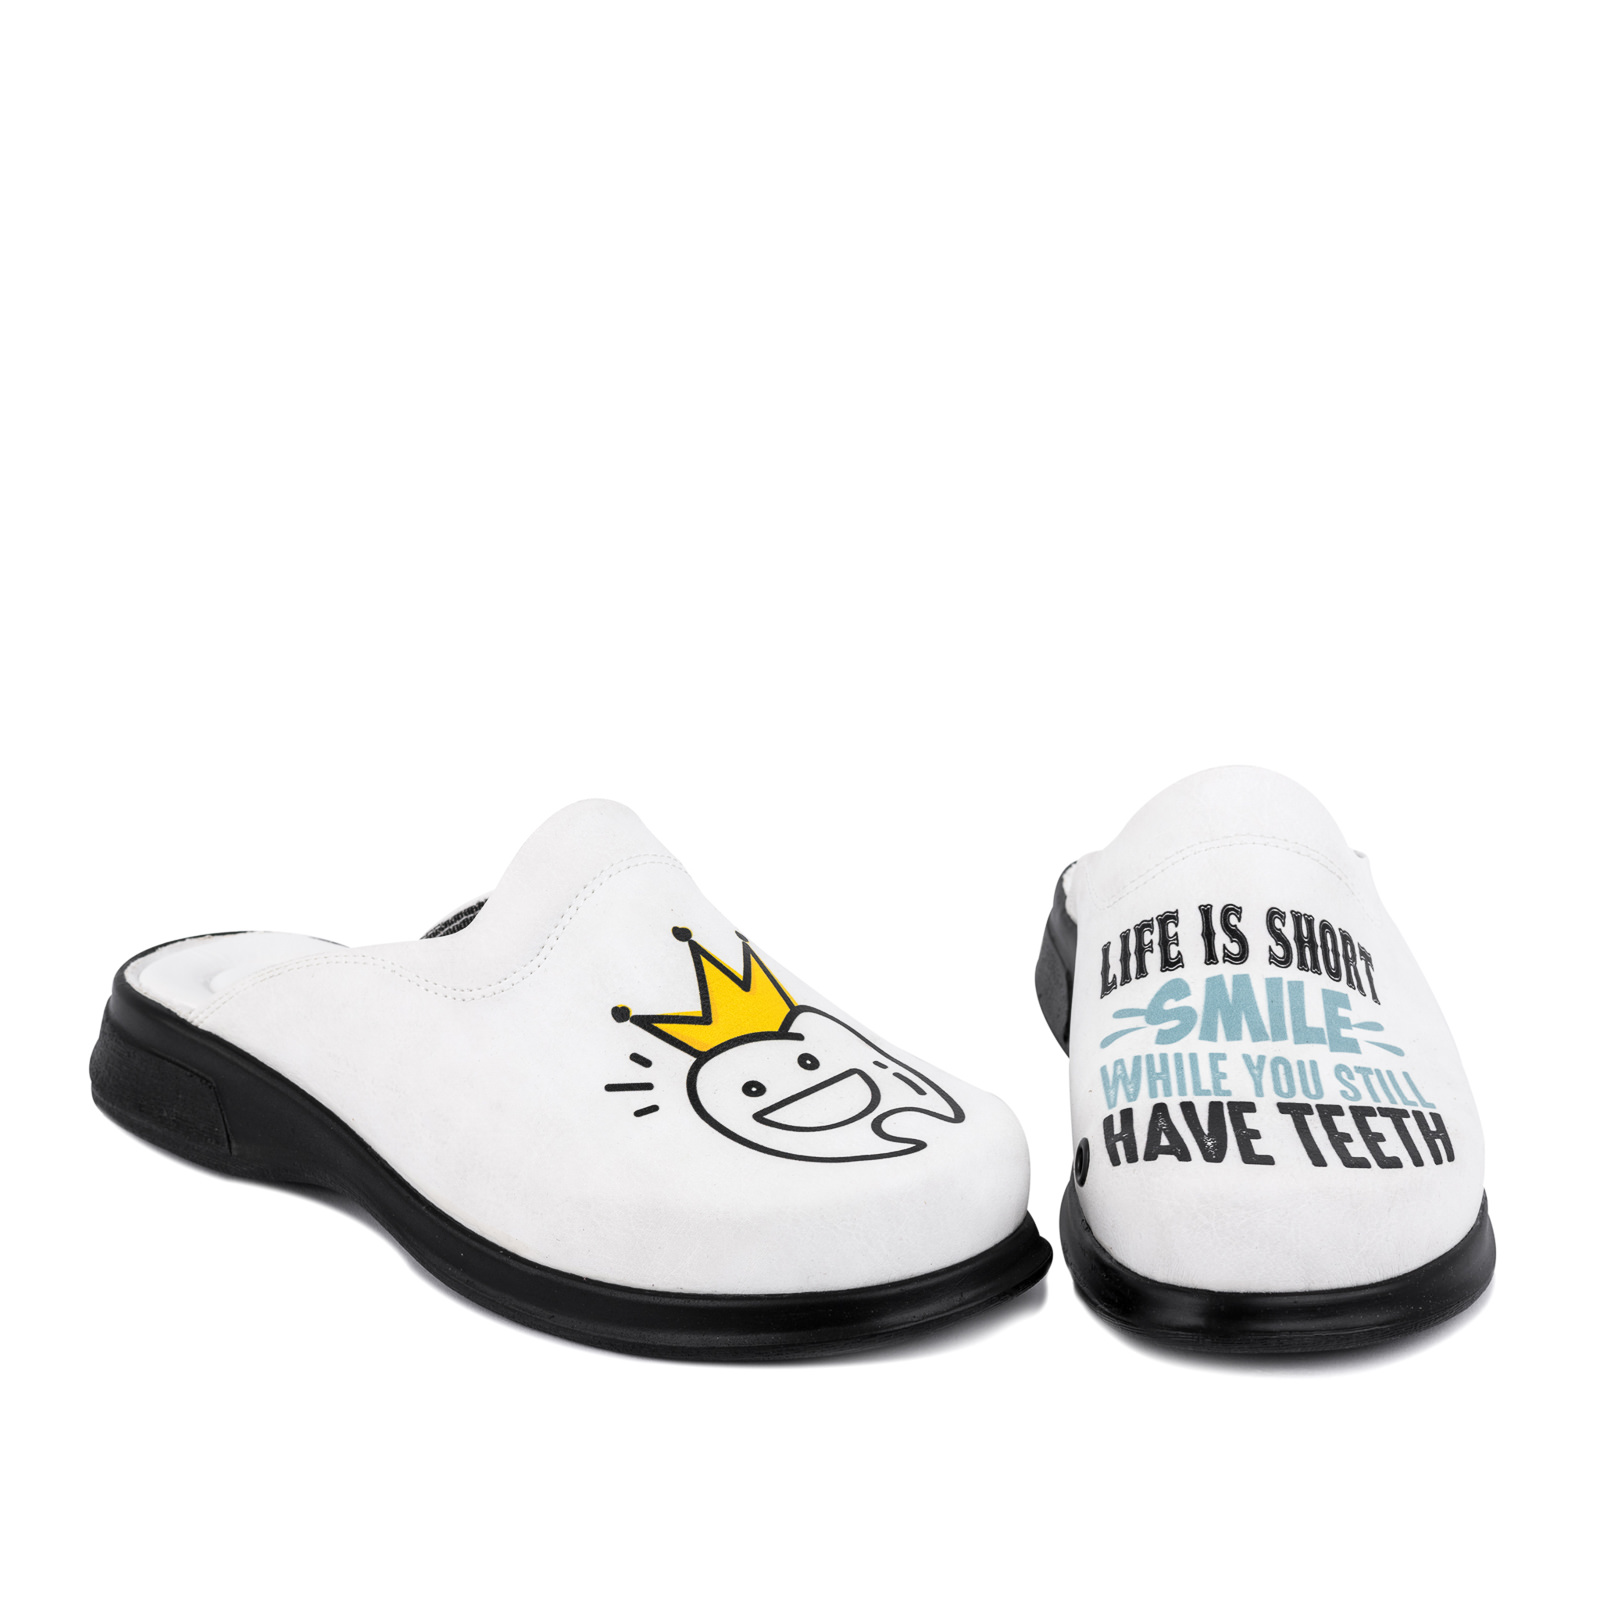 Patterned women clogs A059 - DENTIST - WHITE